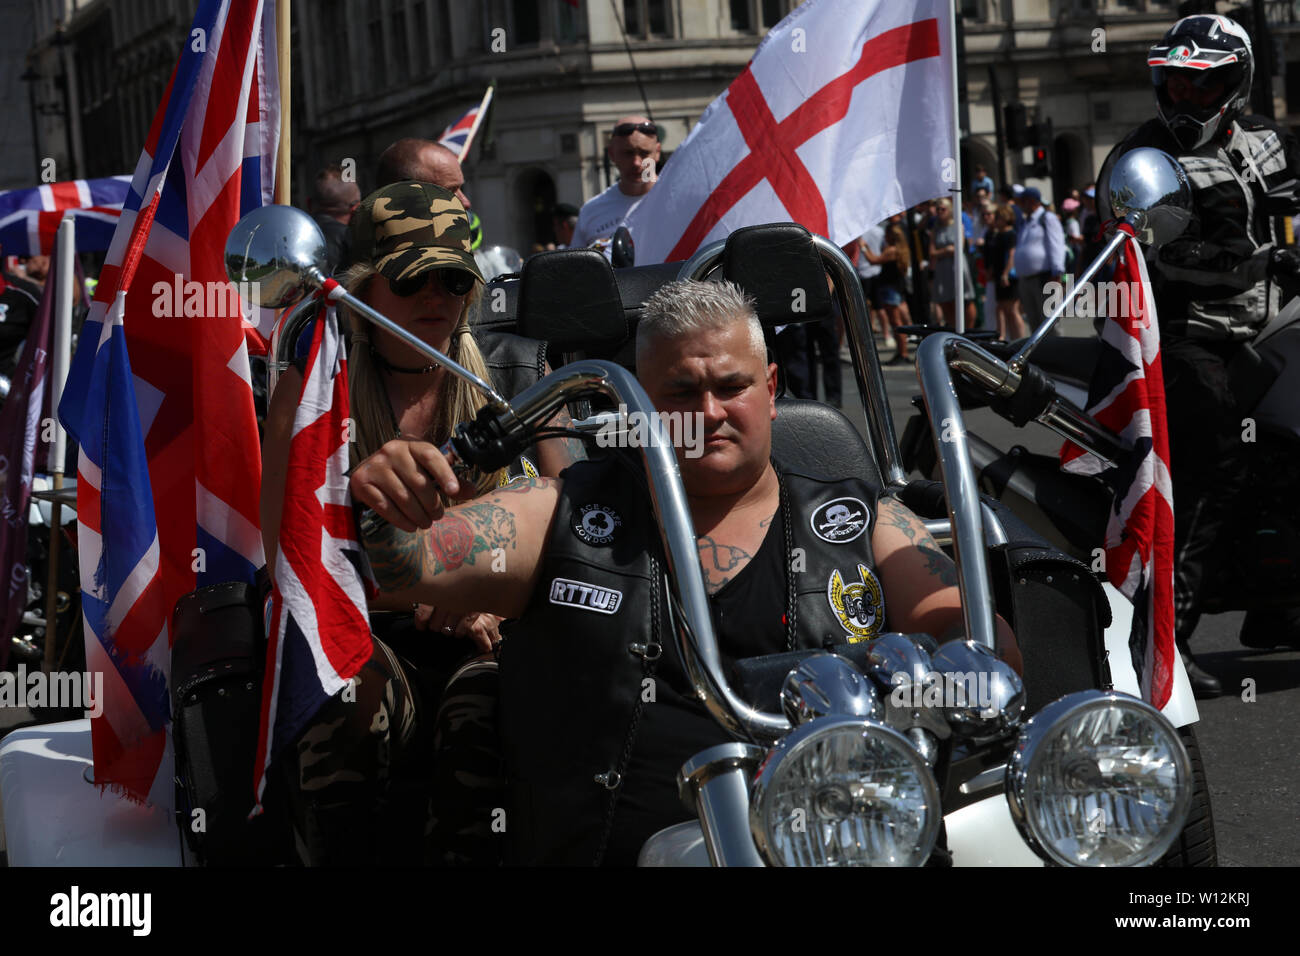 London, UK. 29th June 2019. Army veterans from all over the country gather at Parliament Square to draw attention to several issues they facing such as prosecutions of acts allegedly committed during active service, no help with mental health issues such as Posttraumatic stress disorder (PTSD), isolation and loneliness when leaving the army, and an increasing number of suicides by ex-service men and women. They feel abandoned by those who sent them in conflict in the first place. Credit: Joe Kuis /Alamy News Stock Photo